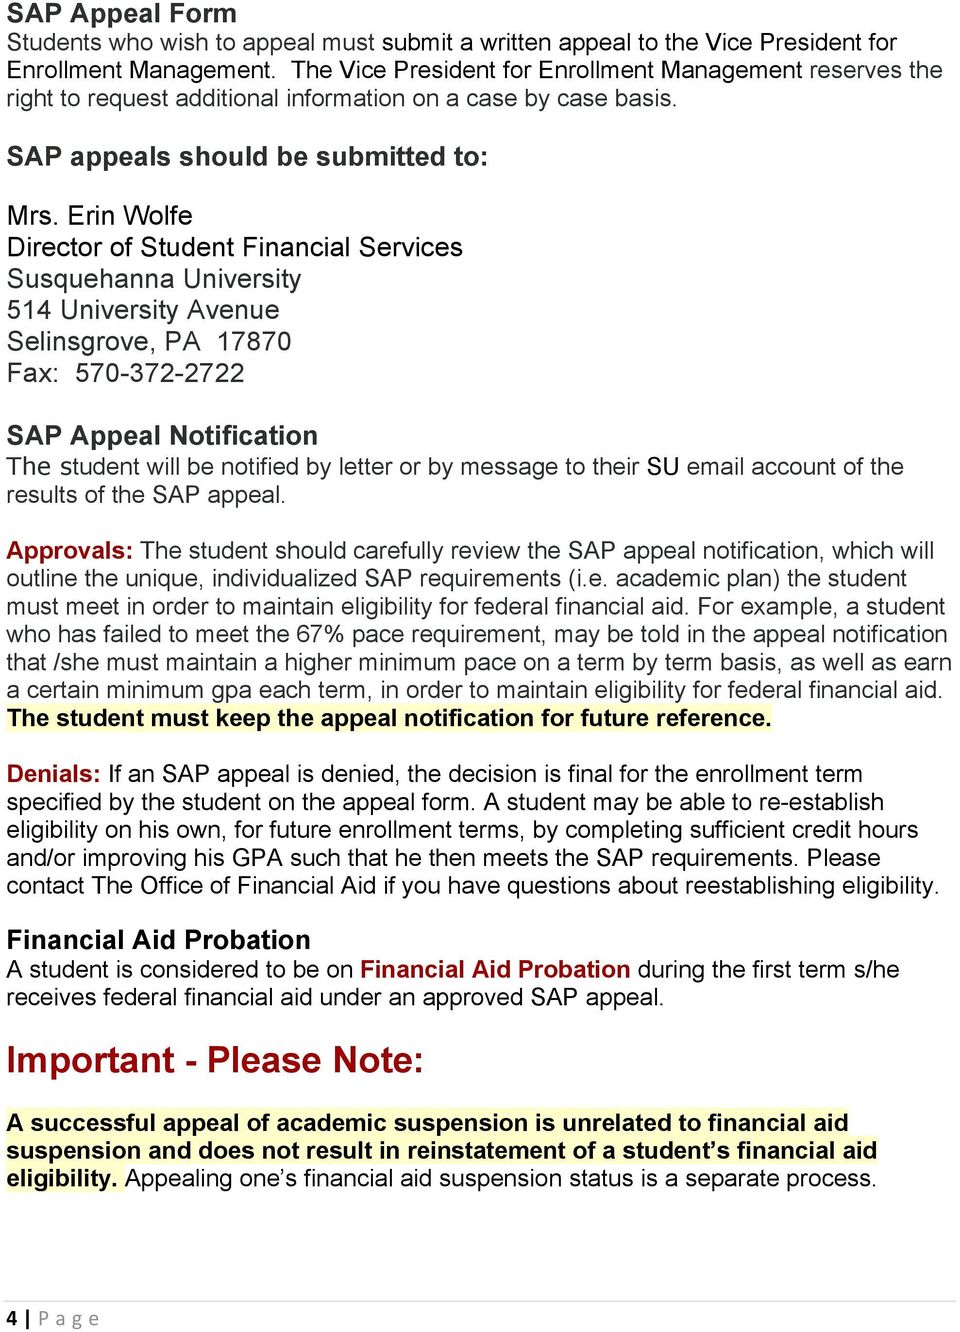 Erin Wolfe Director of Student Financial Services Susquehanna University 514 University Avenue Selinsgrove, PA 17870 Fax: 570-372-2722 SAP Appeal Notification The student will be notified by letter